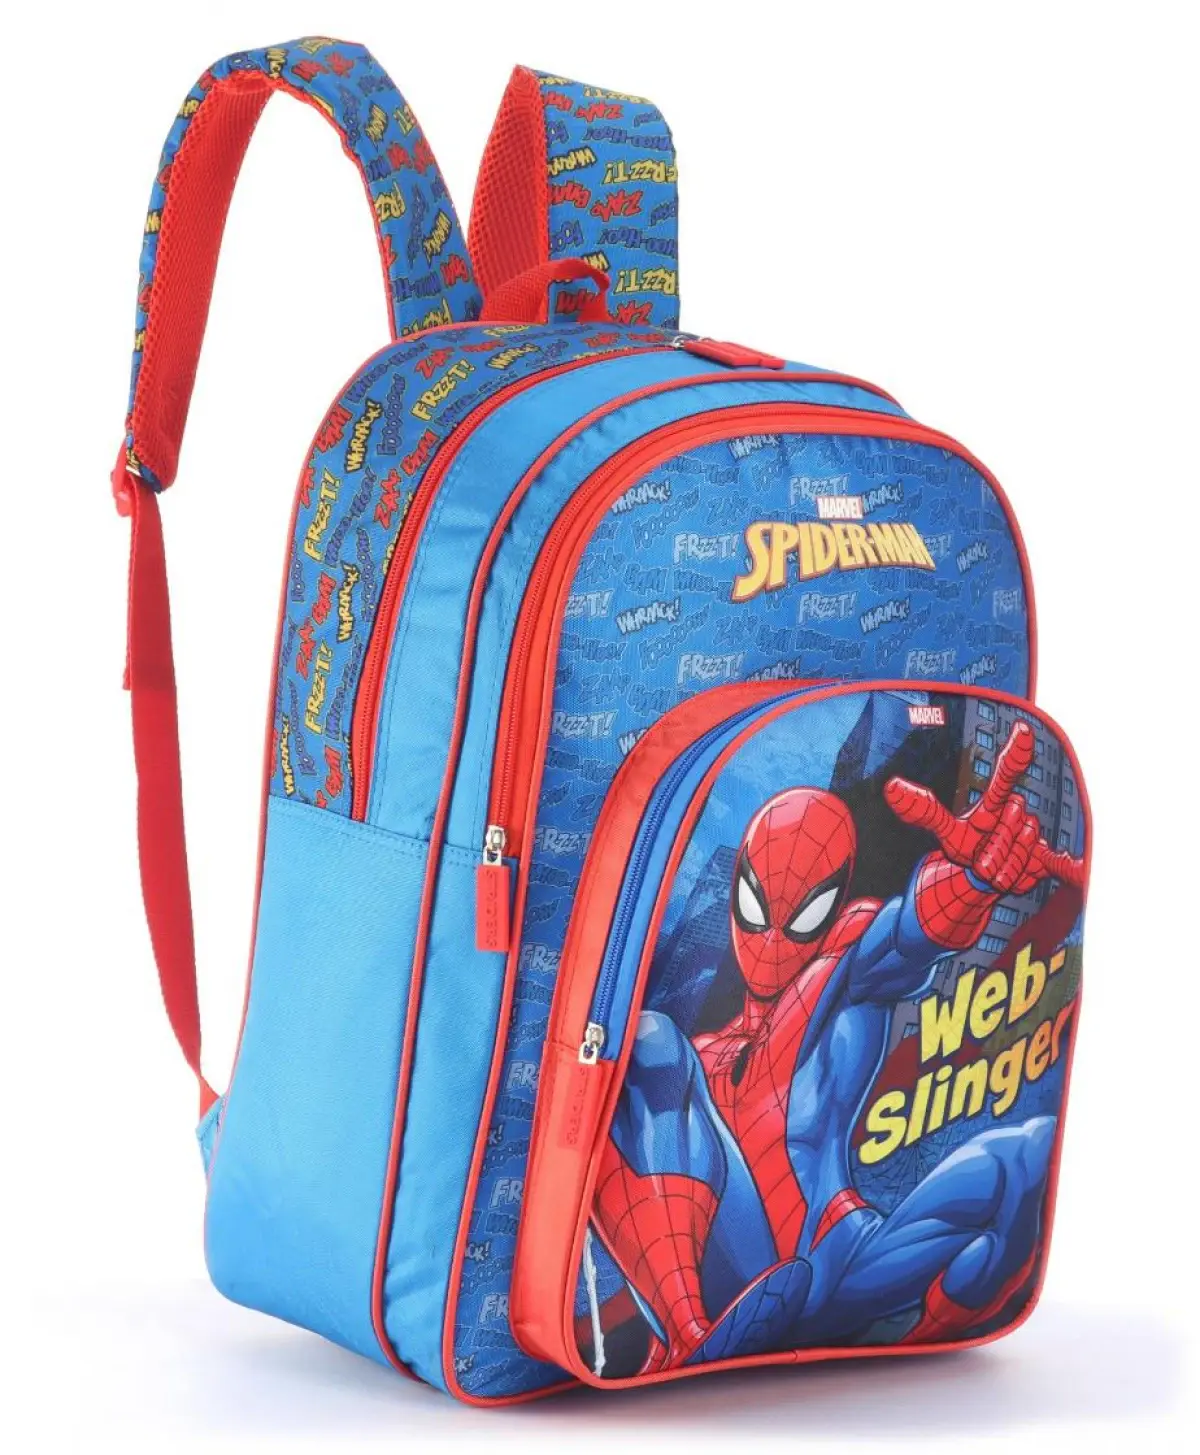 Striders 16 inches Spiderman School Bag Inspire Learning with Spider-Man's Style Multicolor For Kids Ages 6Y+